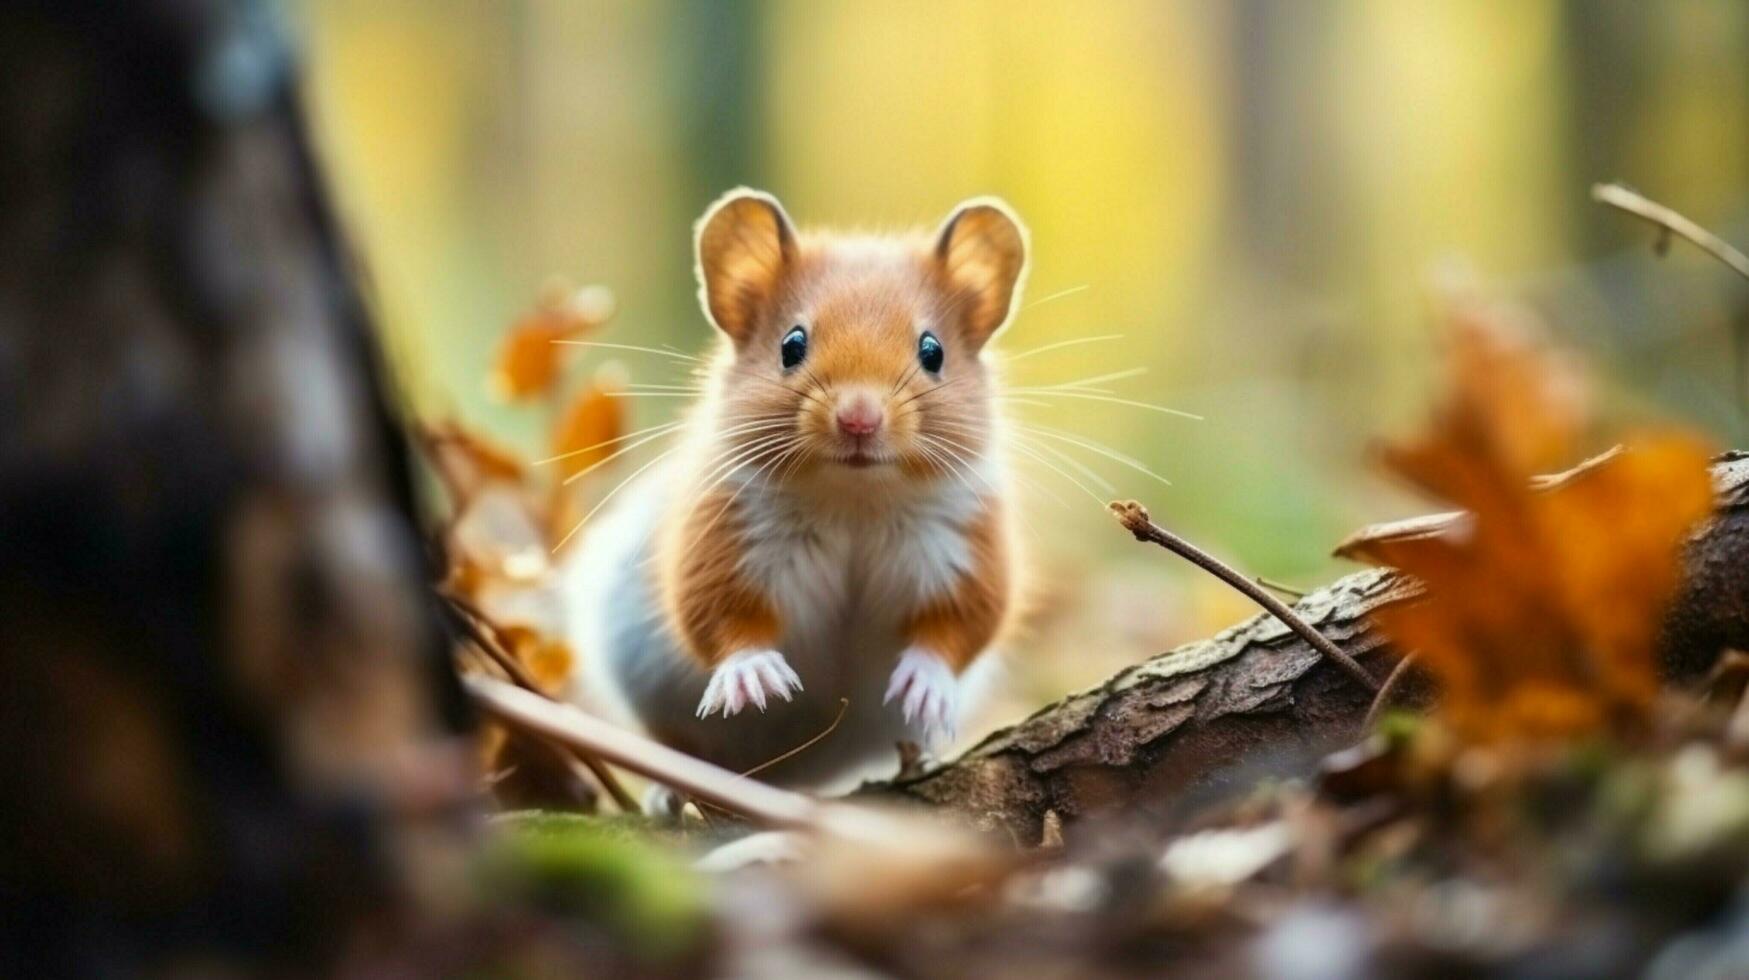 cute small mammal in the wild looking at camera outdoors photo